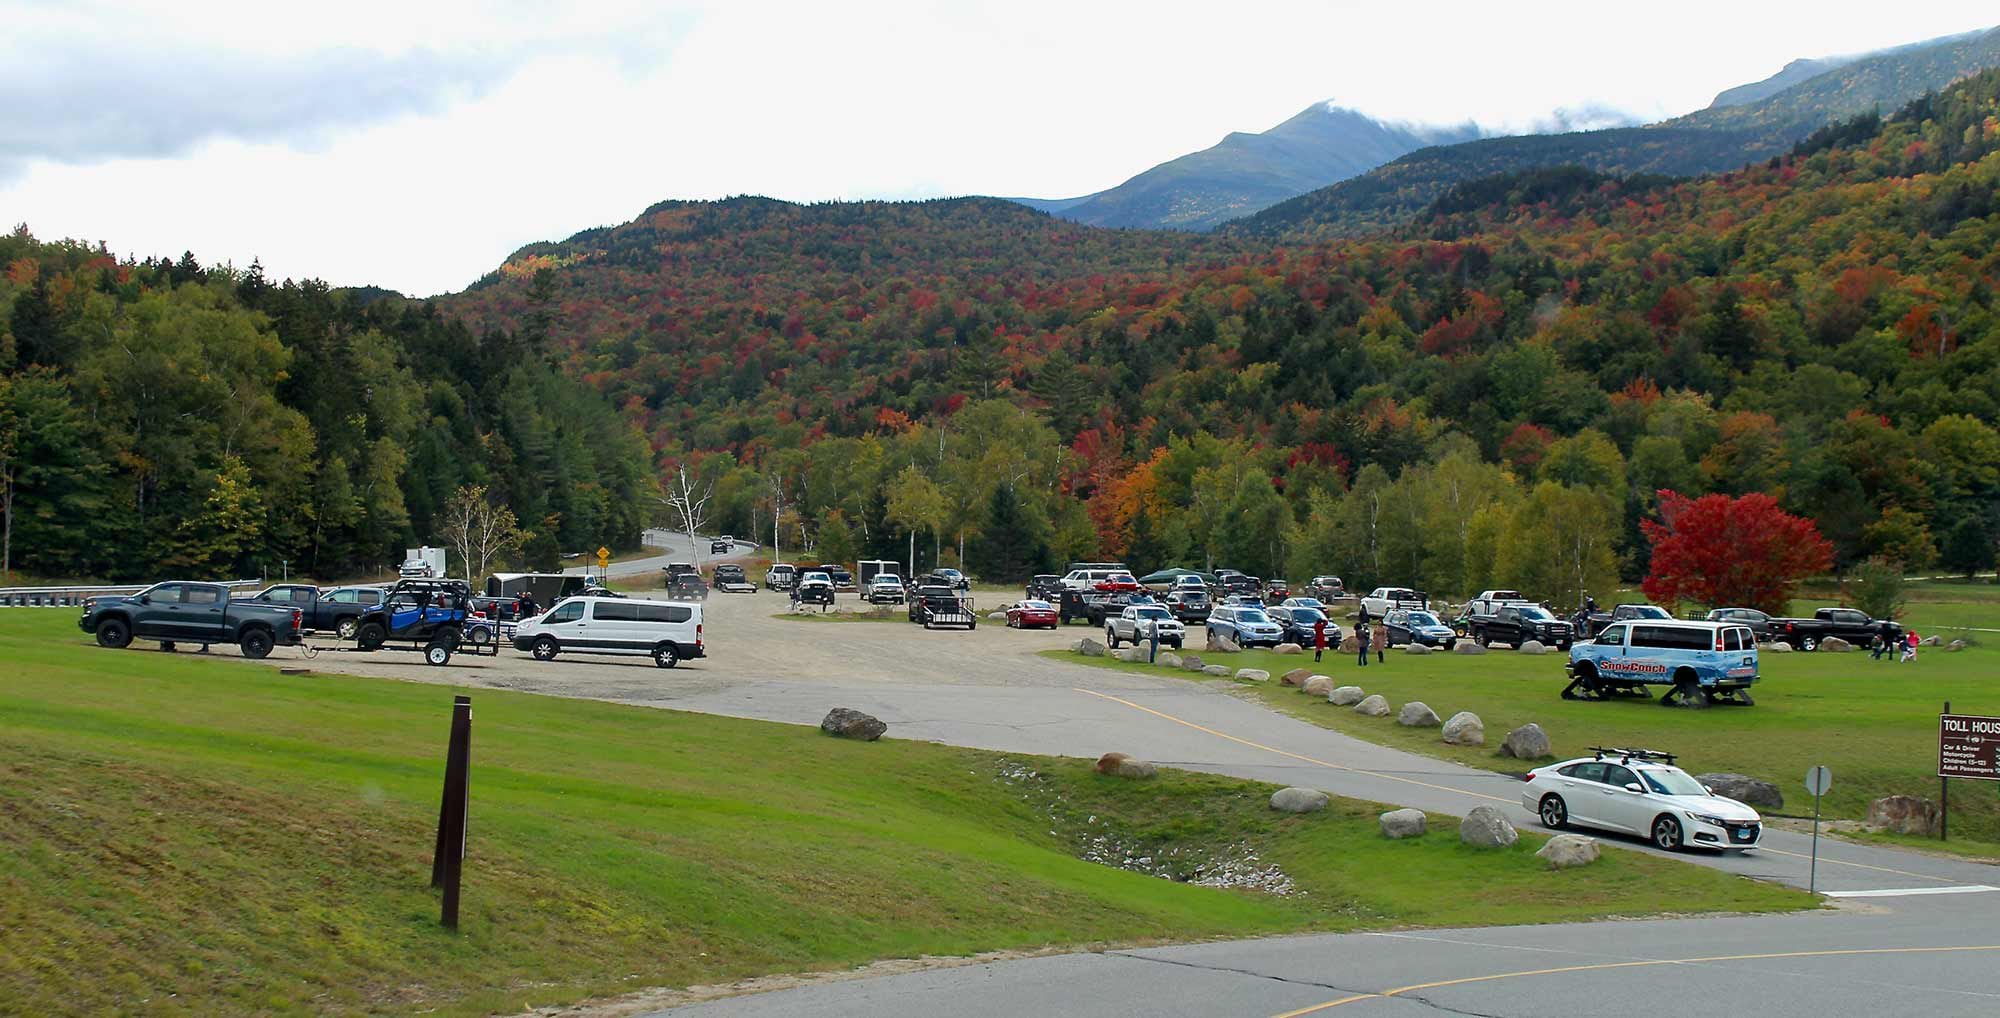 The parking lot offers familiar national forest amenities and a wide area for unloading ATVs and UTVs.